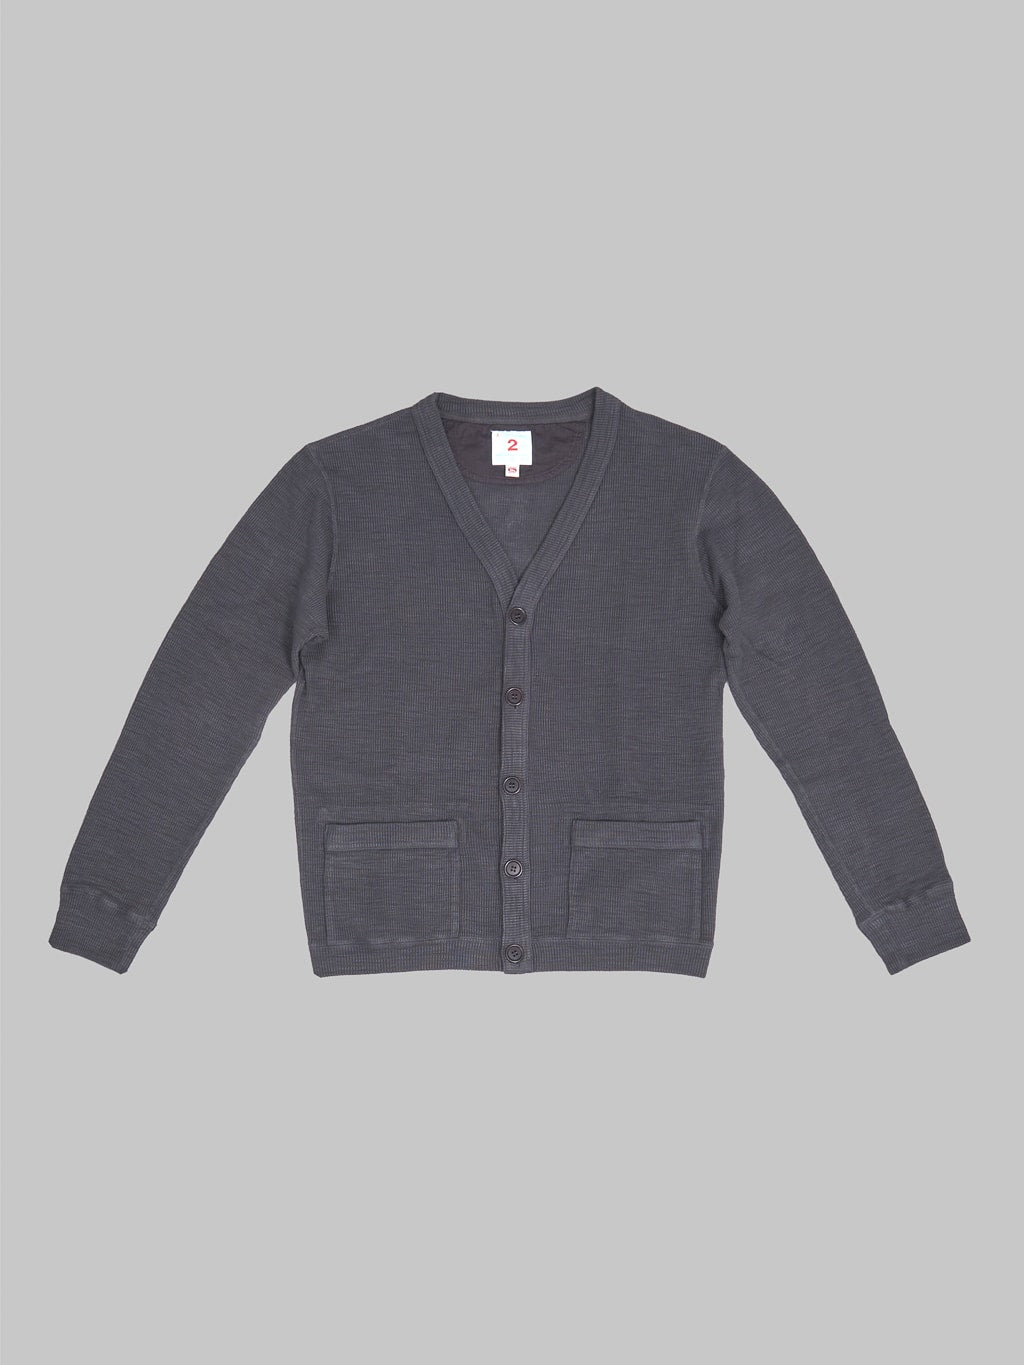 UES Cardigan Black cotton front look